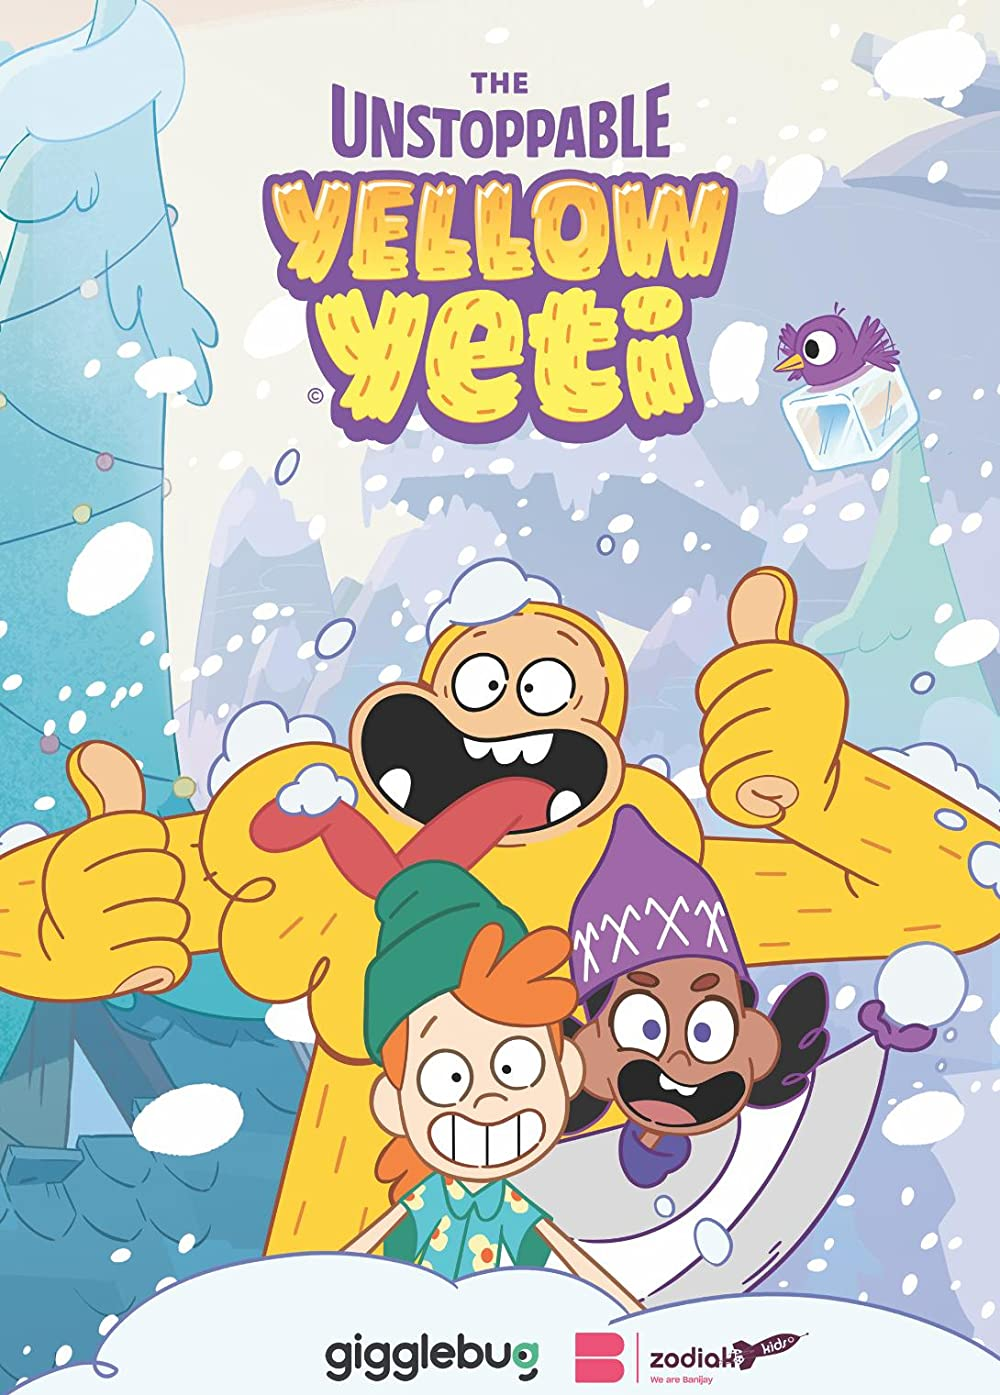 https://static.wikia.nocookie.net/international-entertainment-project/images/3/36/The_Unstoppable_Yellow_Yeti_-_poster.png/revision/latest?cb=20220508143329